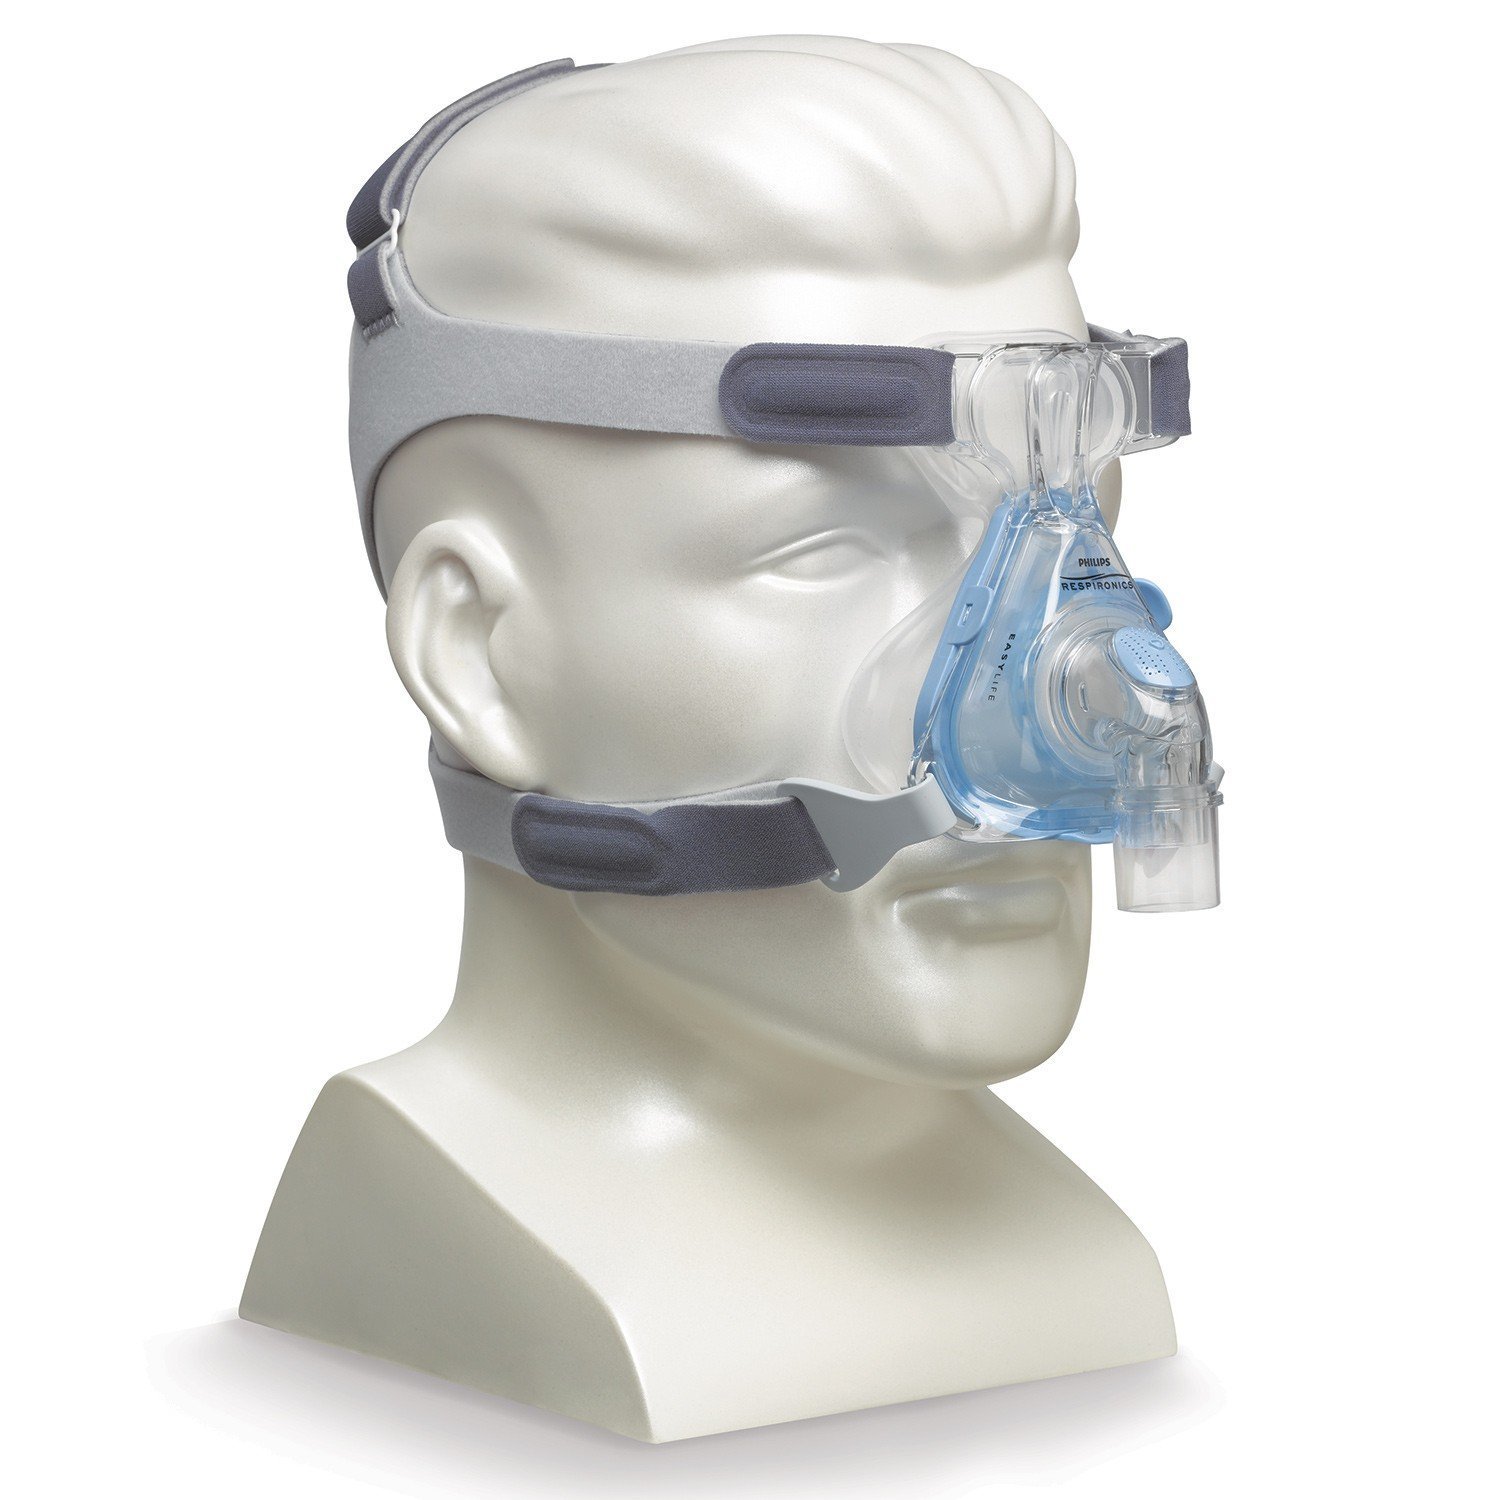 Respironics EasyLife Nasal CPAP Mask with Headgear